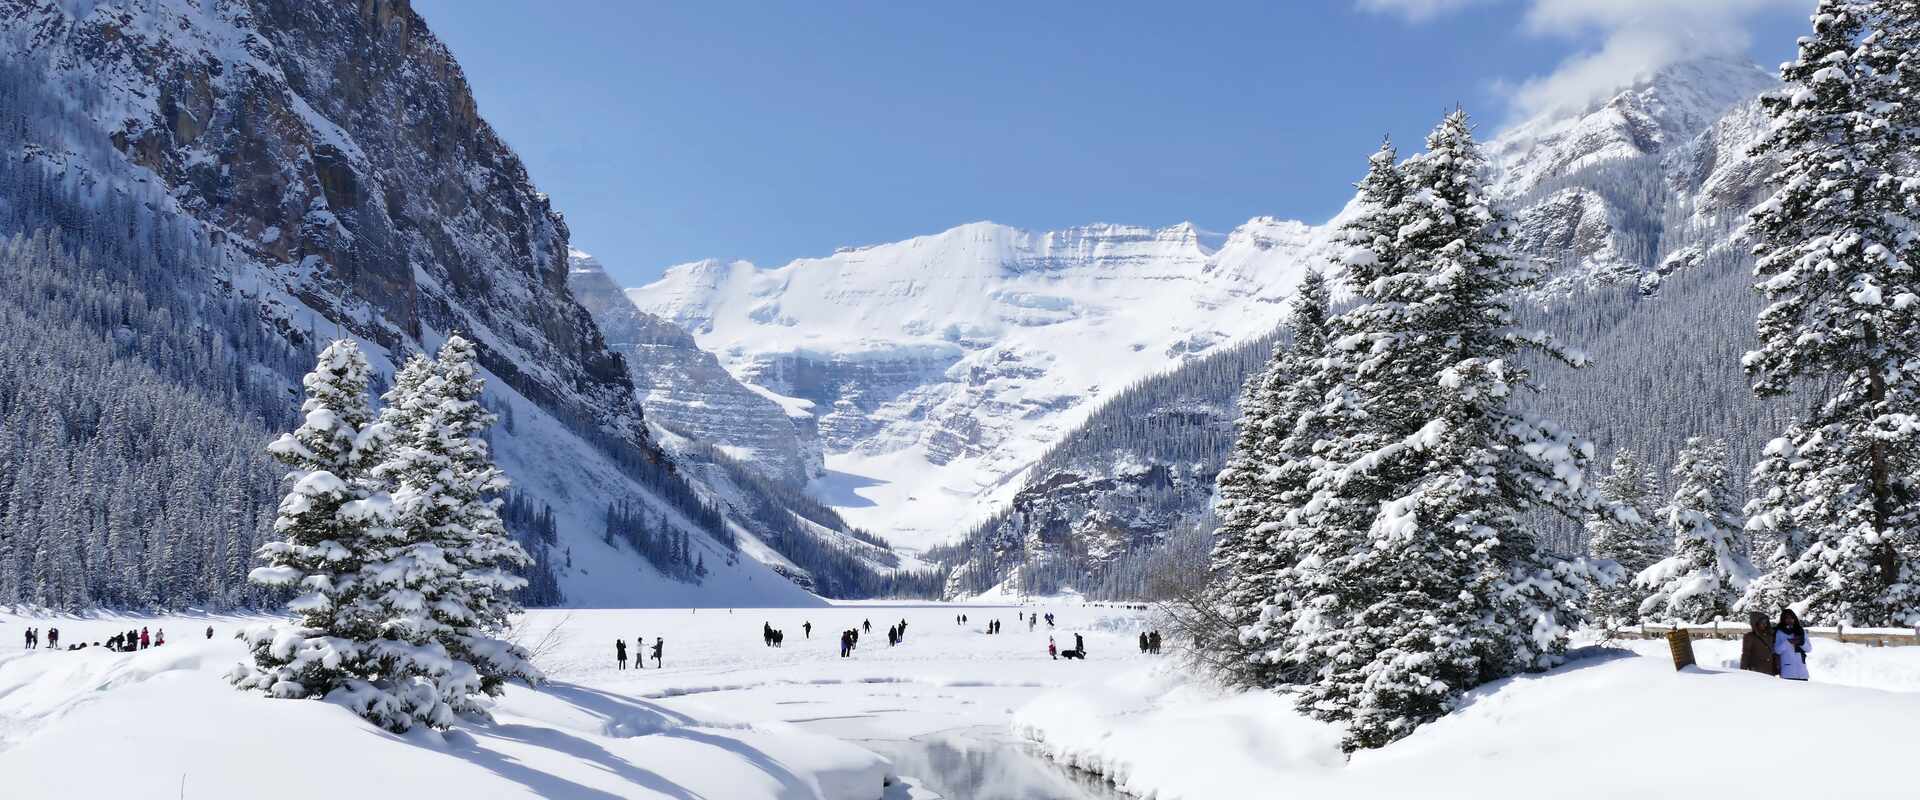 Lake Louise in Winter Snow, Canada 12-5